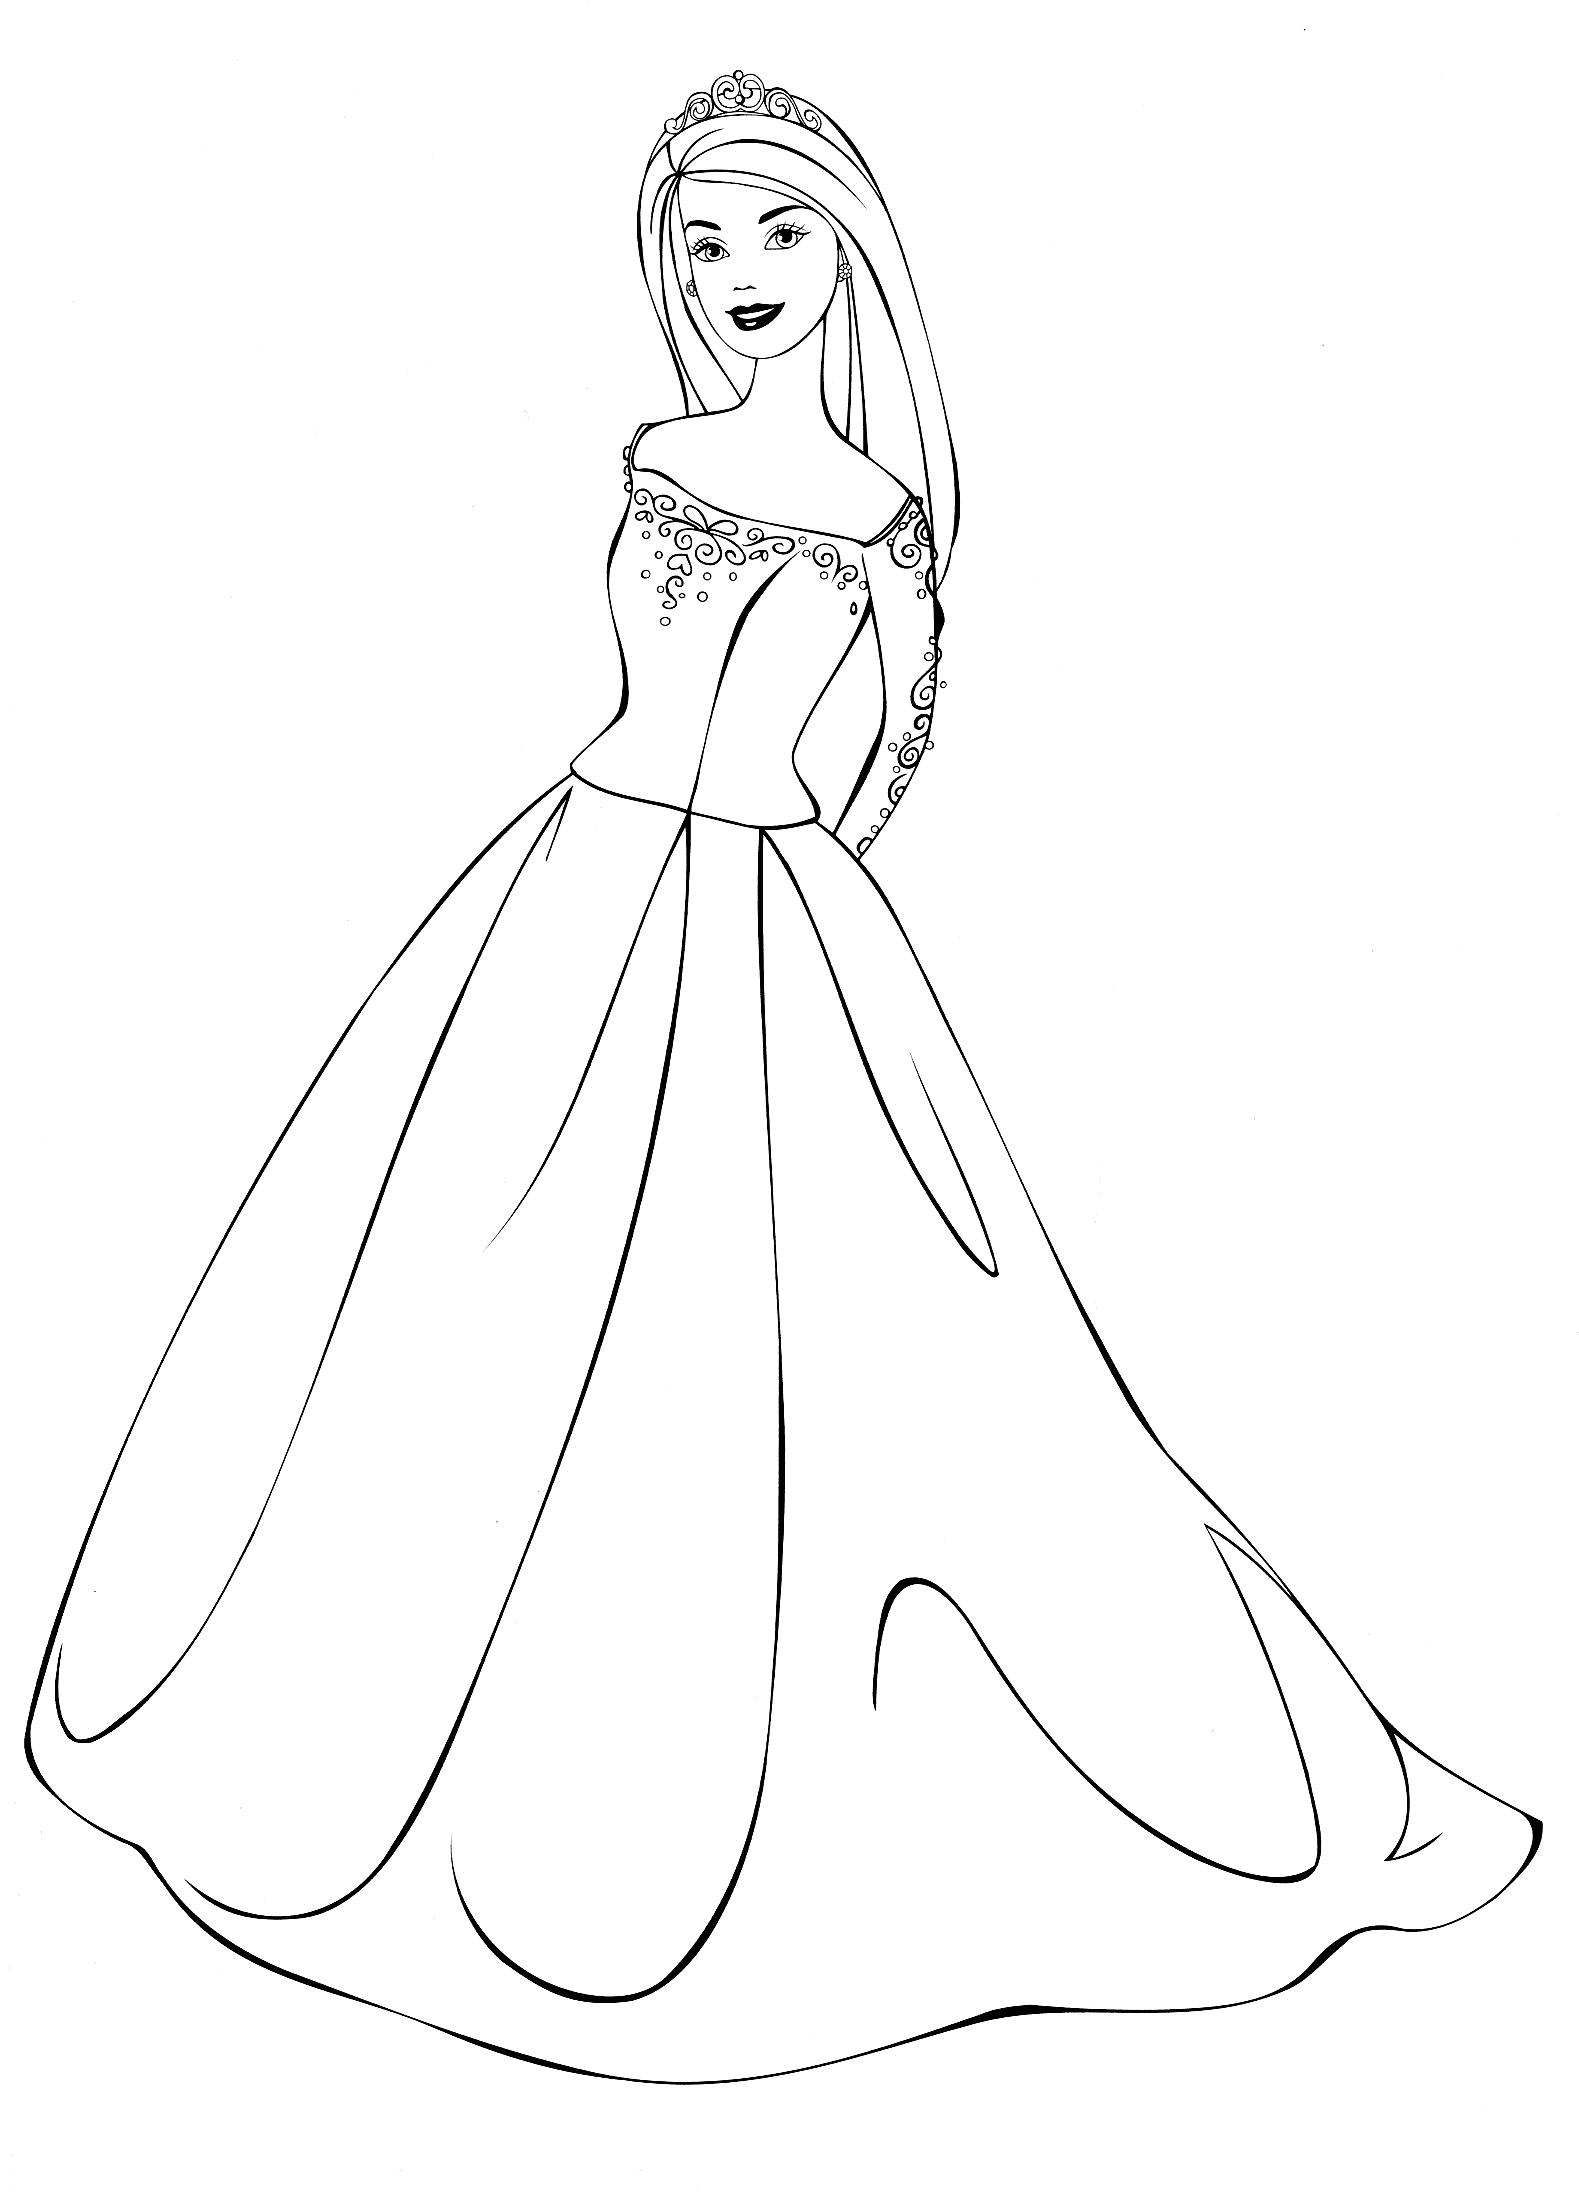 Coloring page   Barbie in a wedding dress